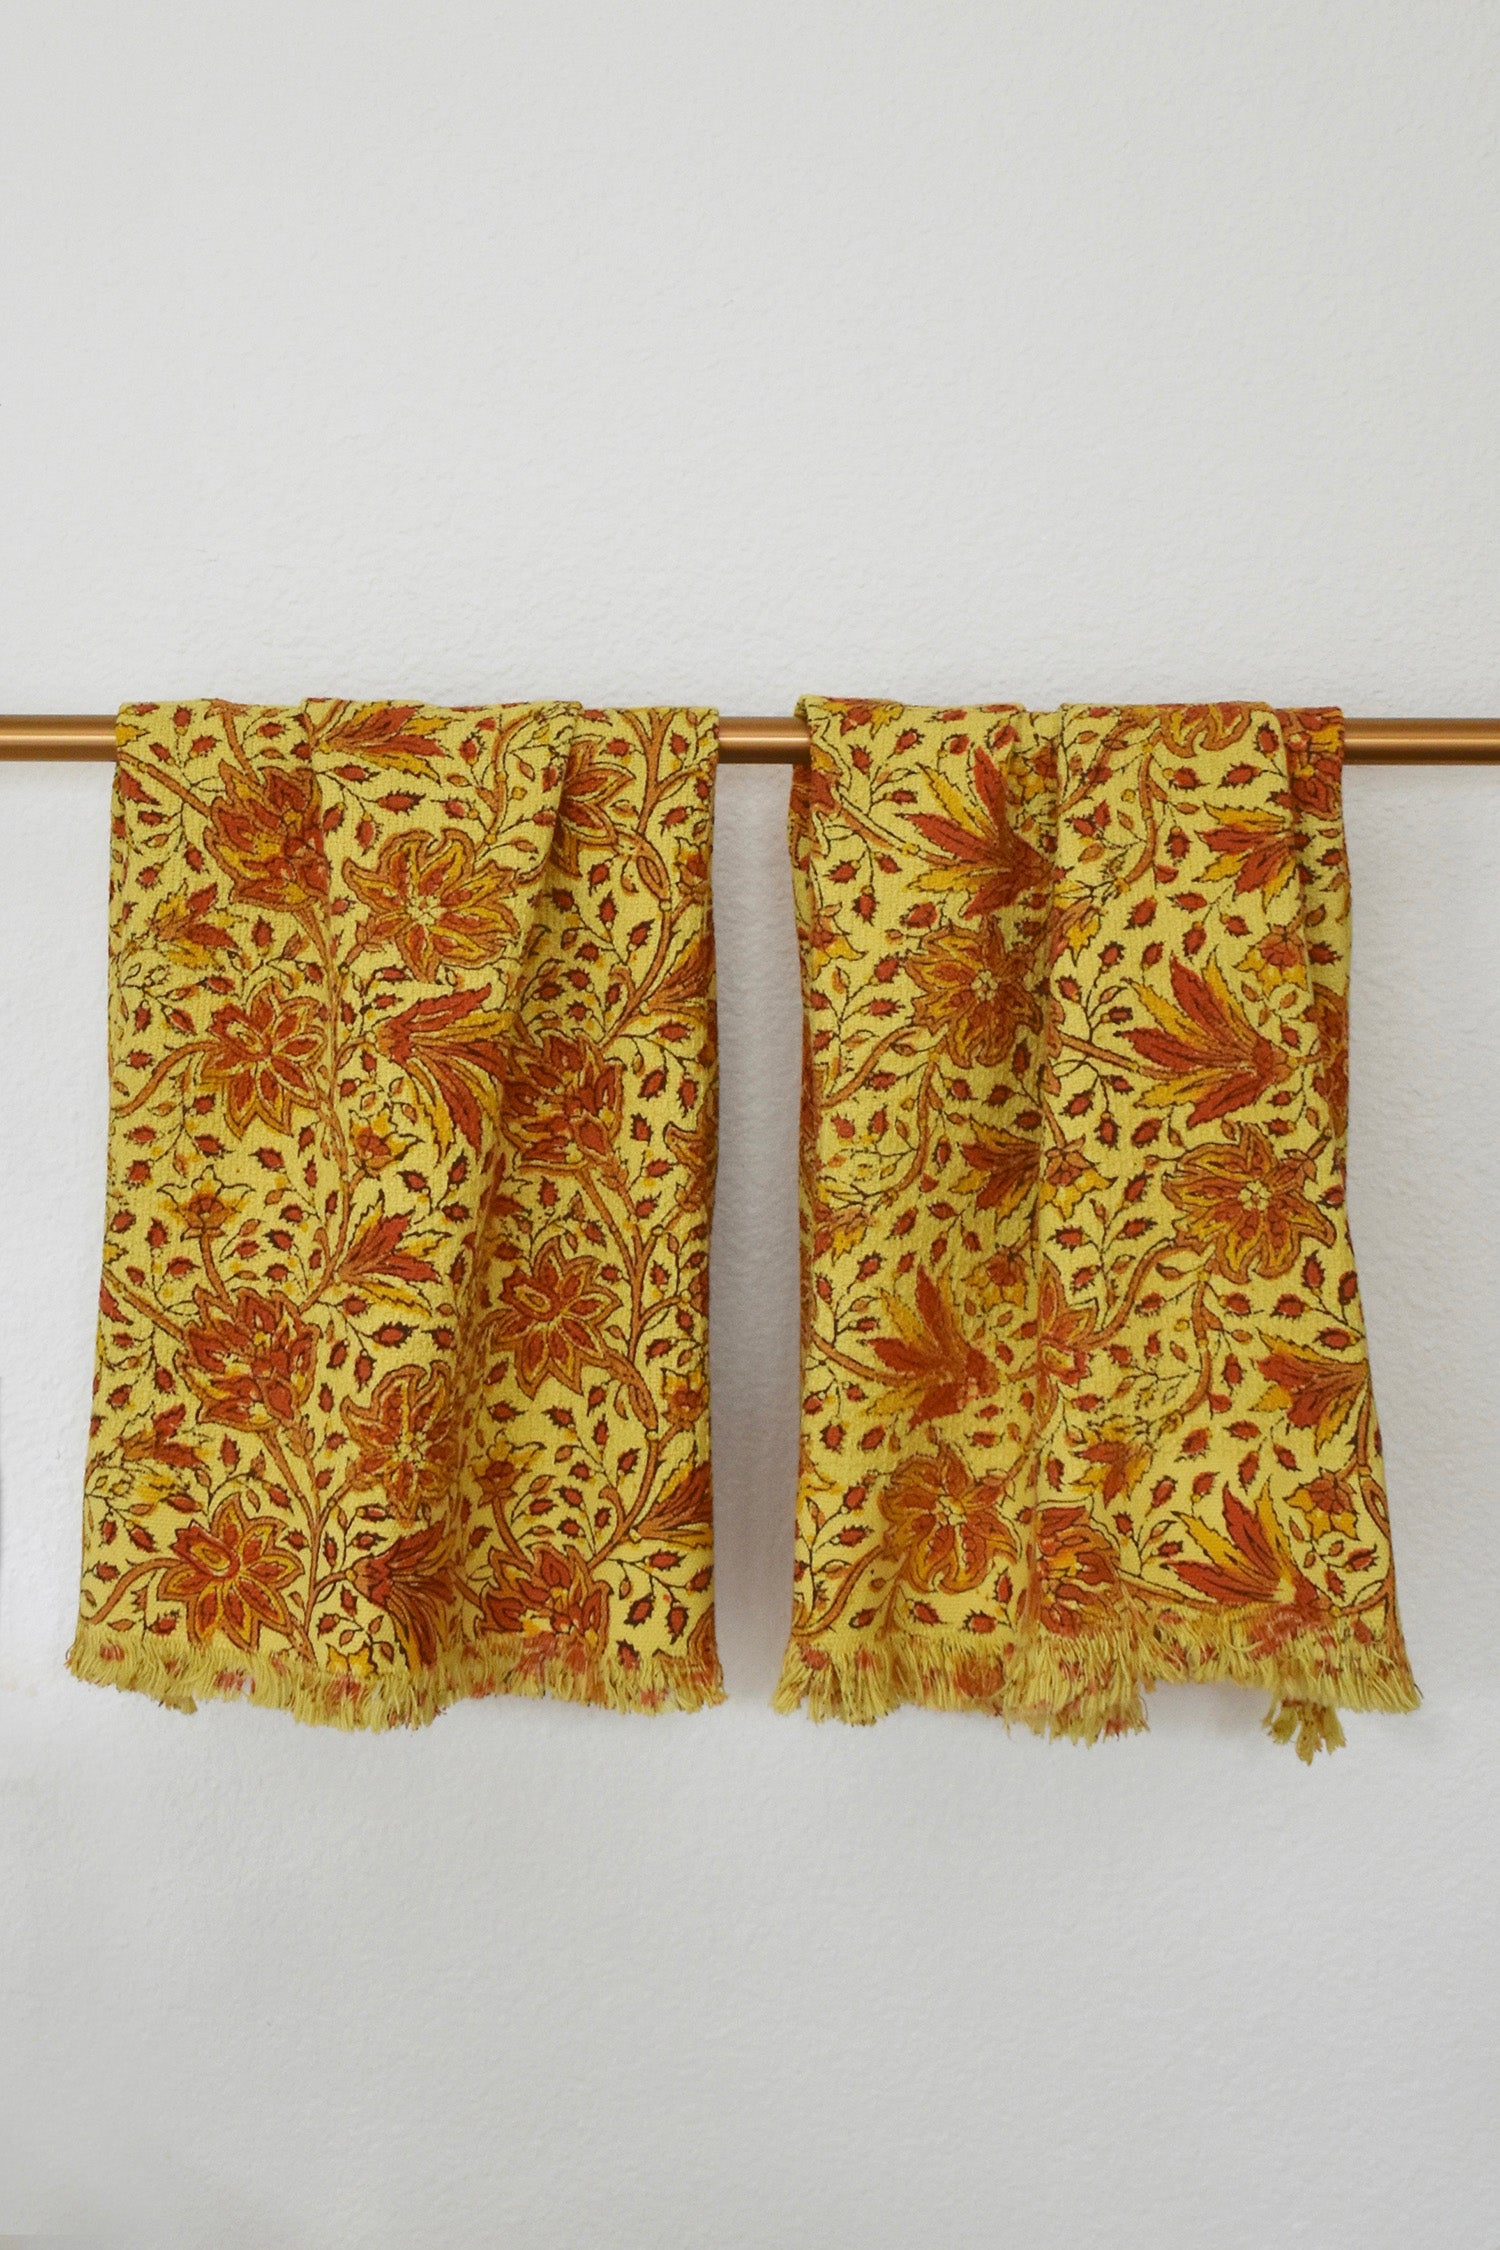 Two Penelope block printed khadi cotton hand towels hanging on a gold bathroom rod